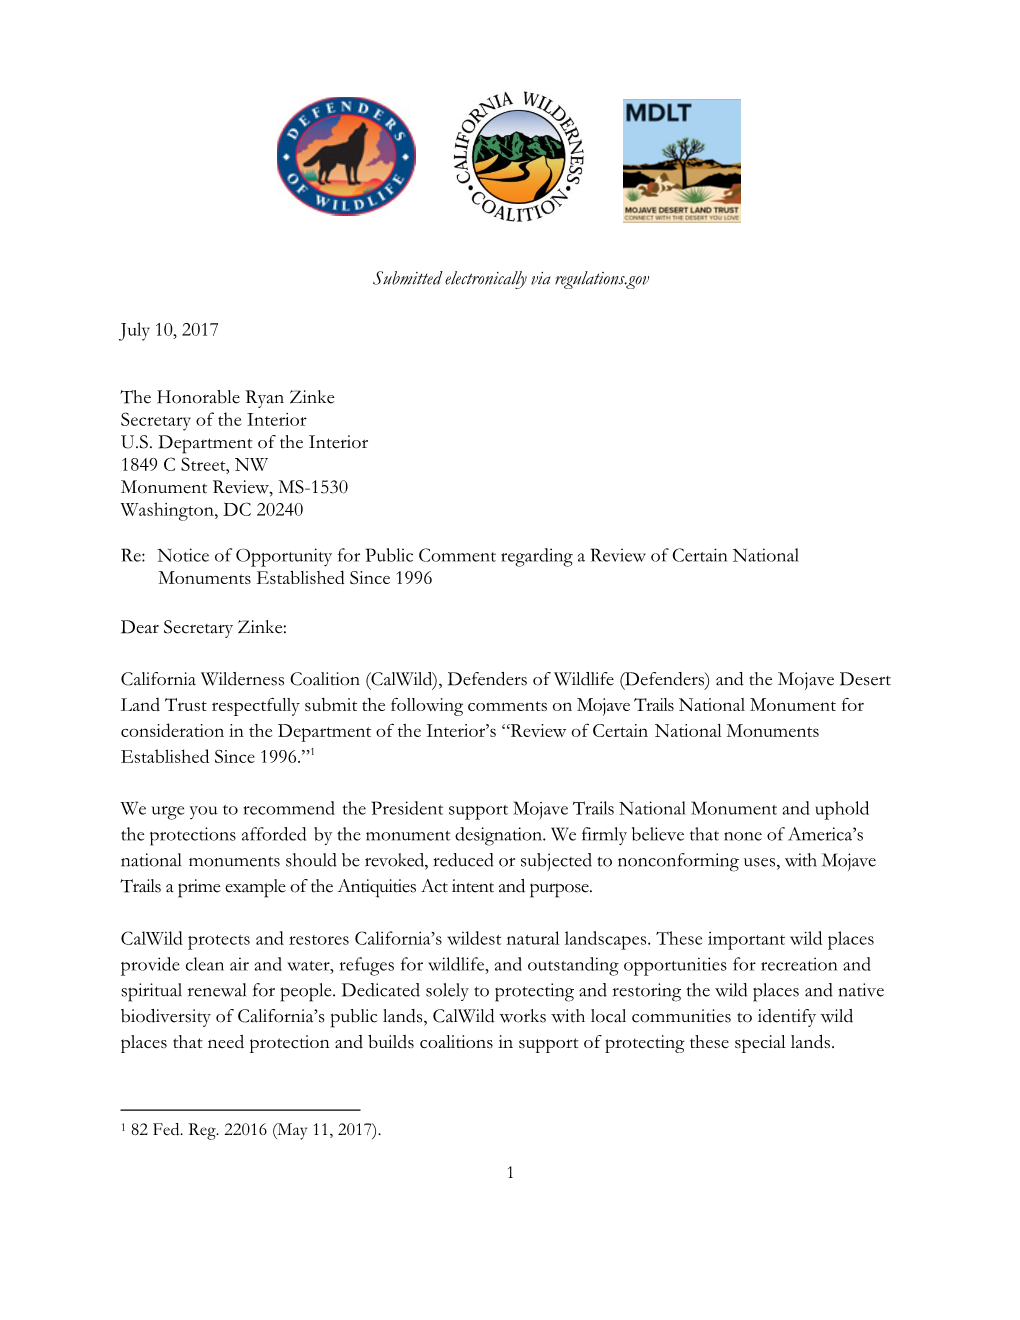 Mojave Trails National Monument for Consideration in the Department of the Interior’S “Review of Certain National Monuments Established Since 1996.”1